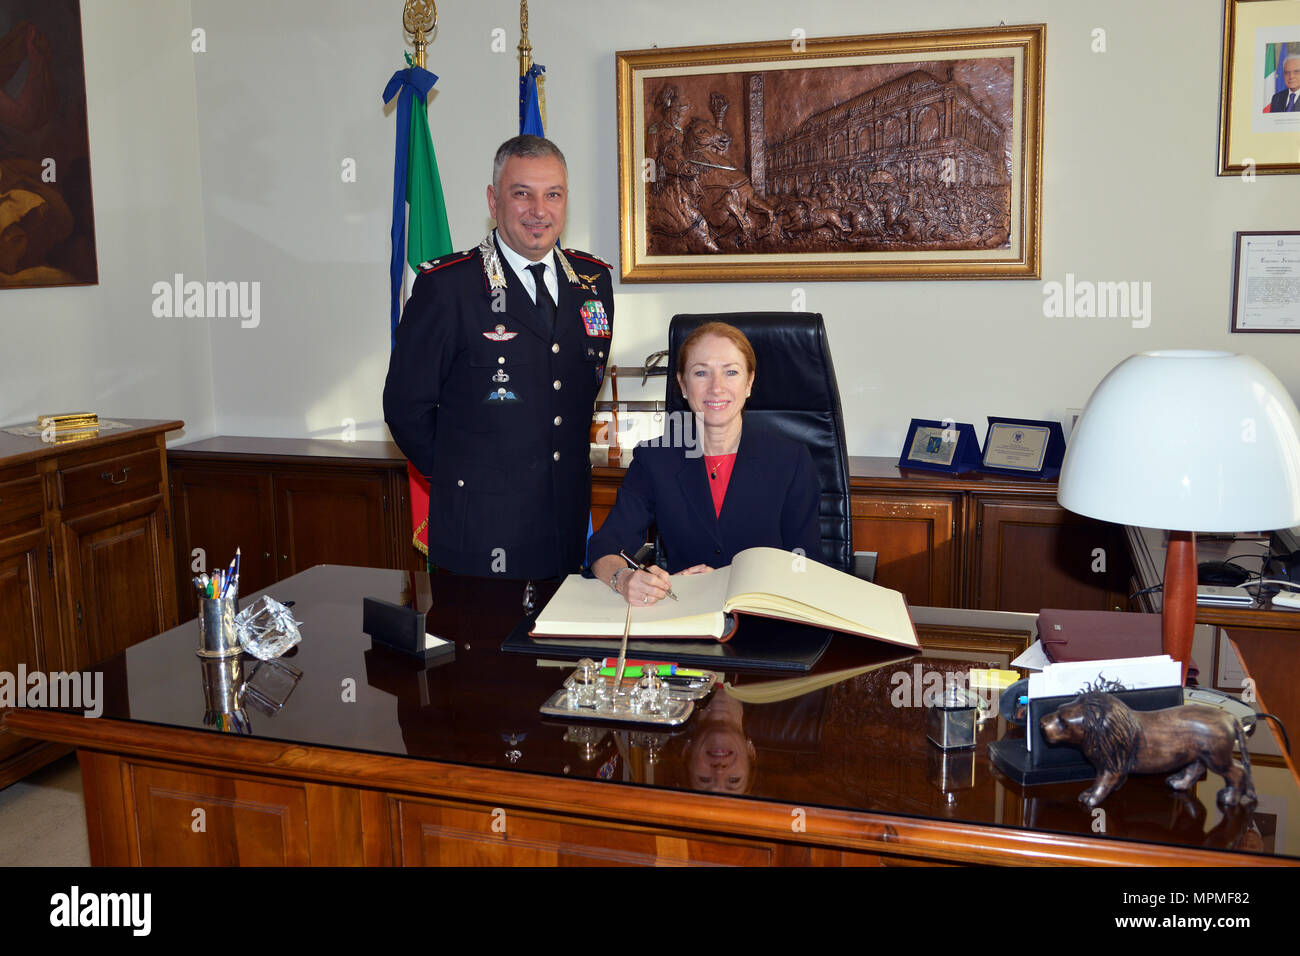 Brig. Gen. Giovanni Pietro Barbano, Center of Excellence for Stability Police Units (CoESPU) director (left), and Ms. Kelly Degnan, Charge’ d’Affaires ad interim U.S. Embassy & Consulates Italy (right), pose for photo during visit at Center of Excellence for Stability Police Units (CoESPU) Vicenza, Italy, Mar. 30, 2017.(U.S. Army Photo by Visual Information Specialist Antonio Bedin/released) Stock Photo